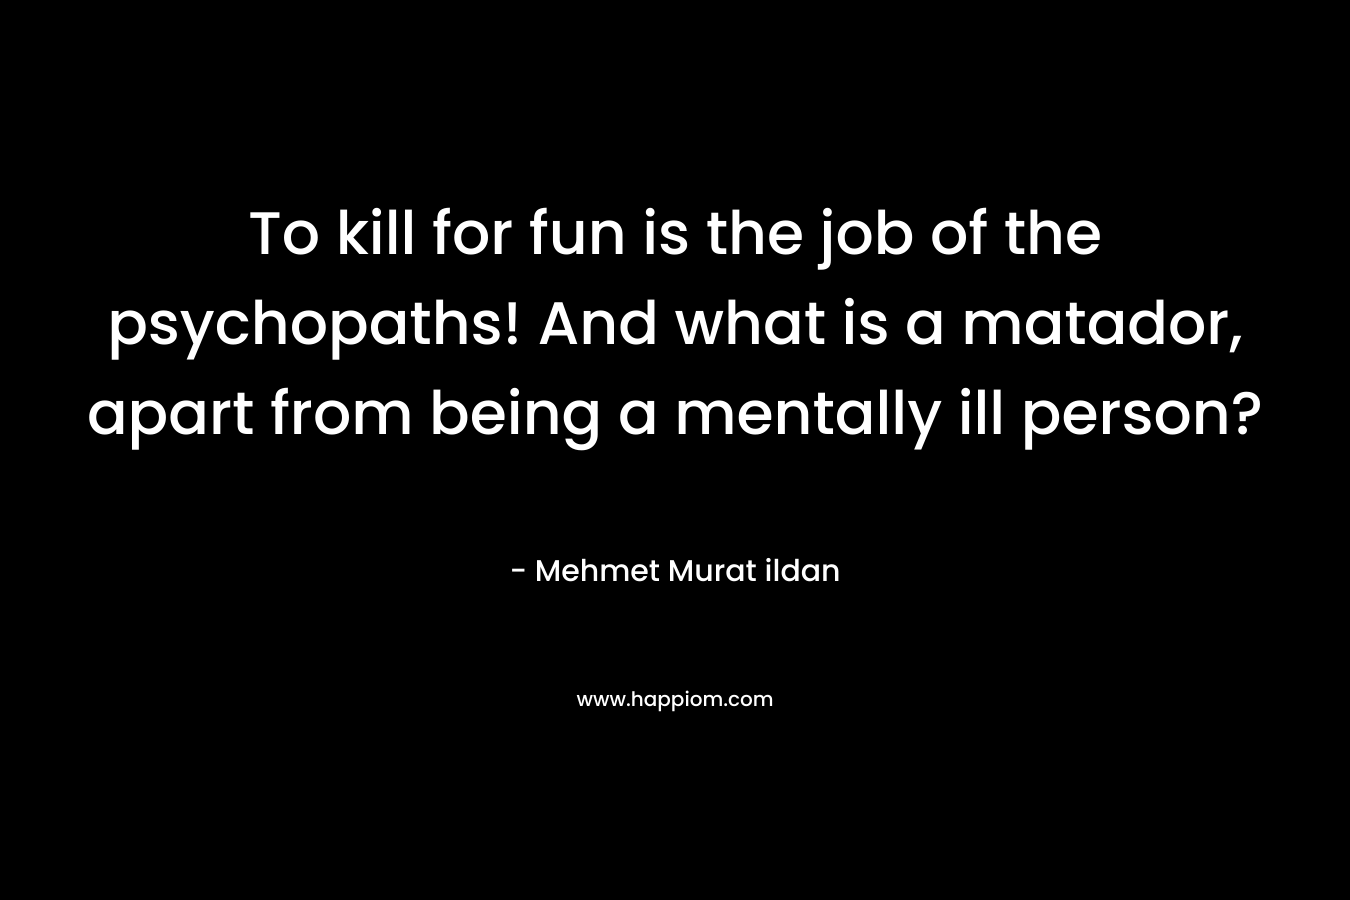 To kill for fun is the job of the psychopaths! And what is a matador, apart from being a mentally ill person?